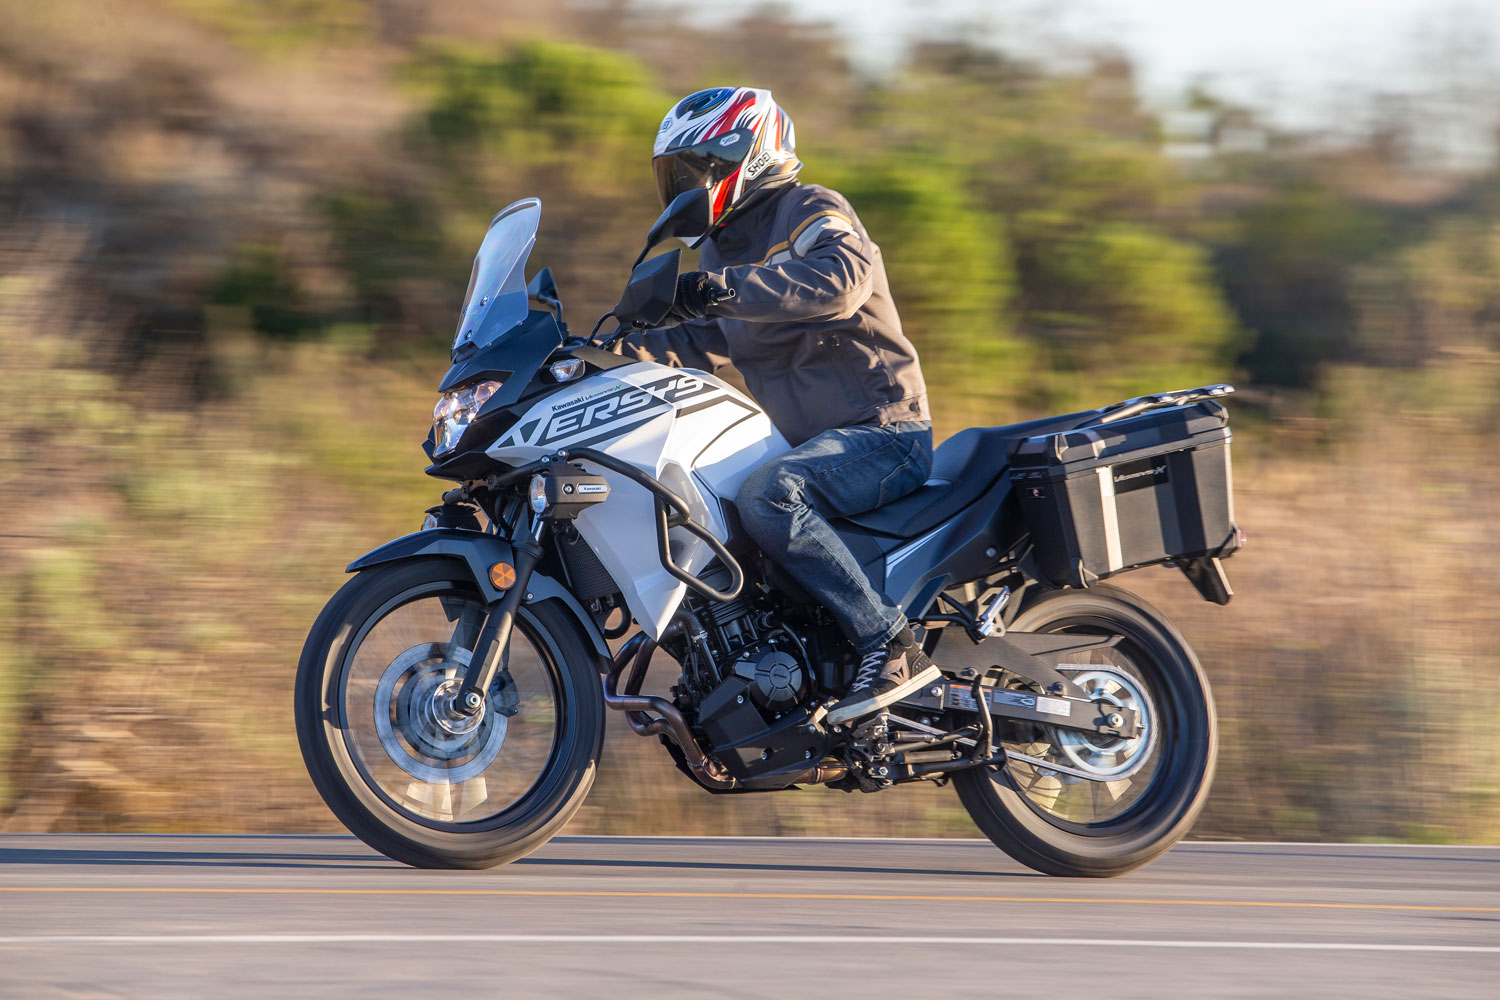 Fobia quemado puente 2020 Kawasaki Versys-X 300 First Ride Review | Cycle World